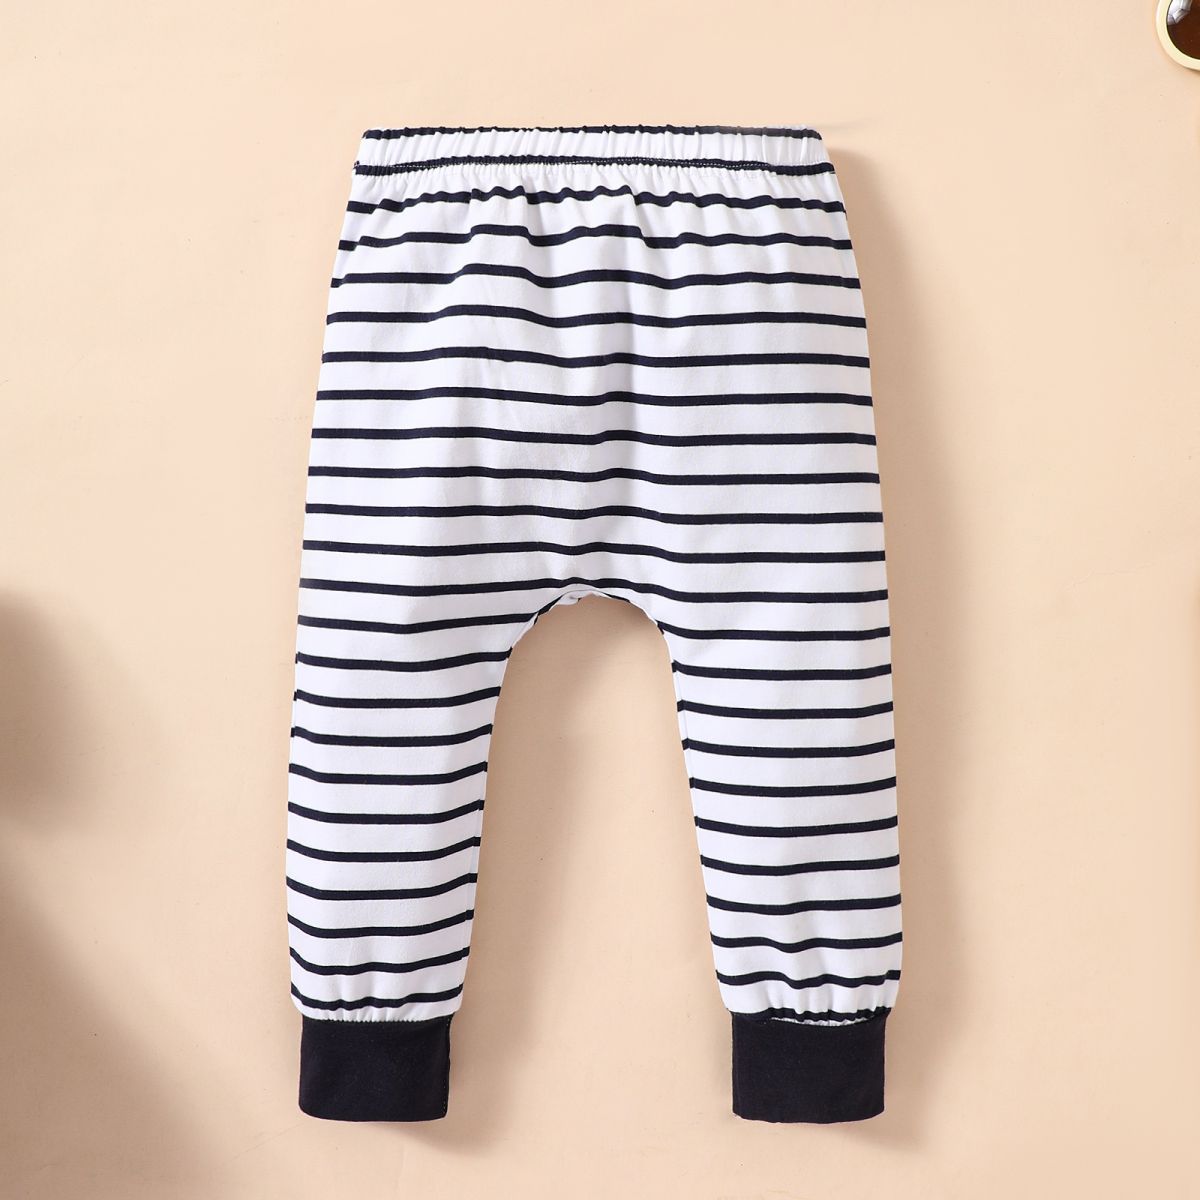 Baby Elephant Graphic Top and Striped Pants Set